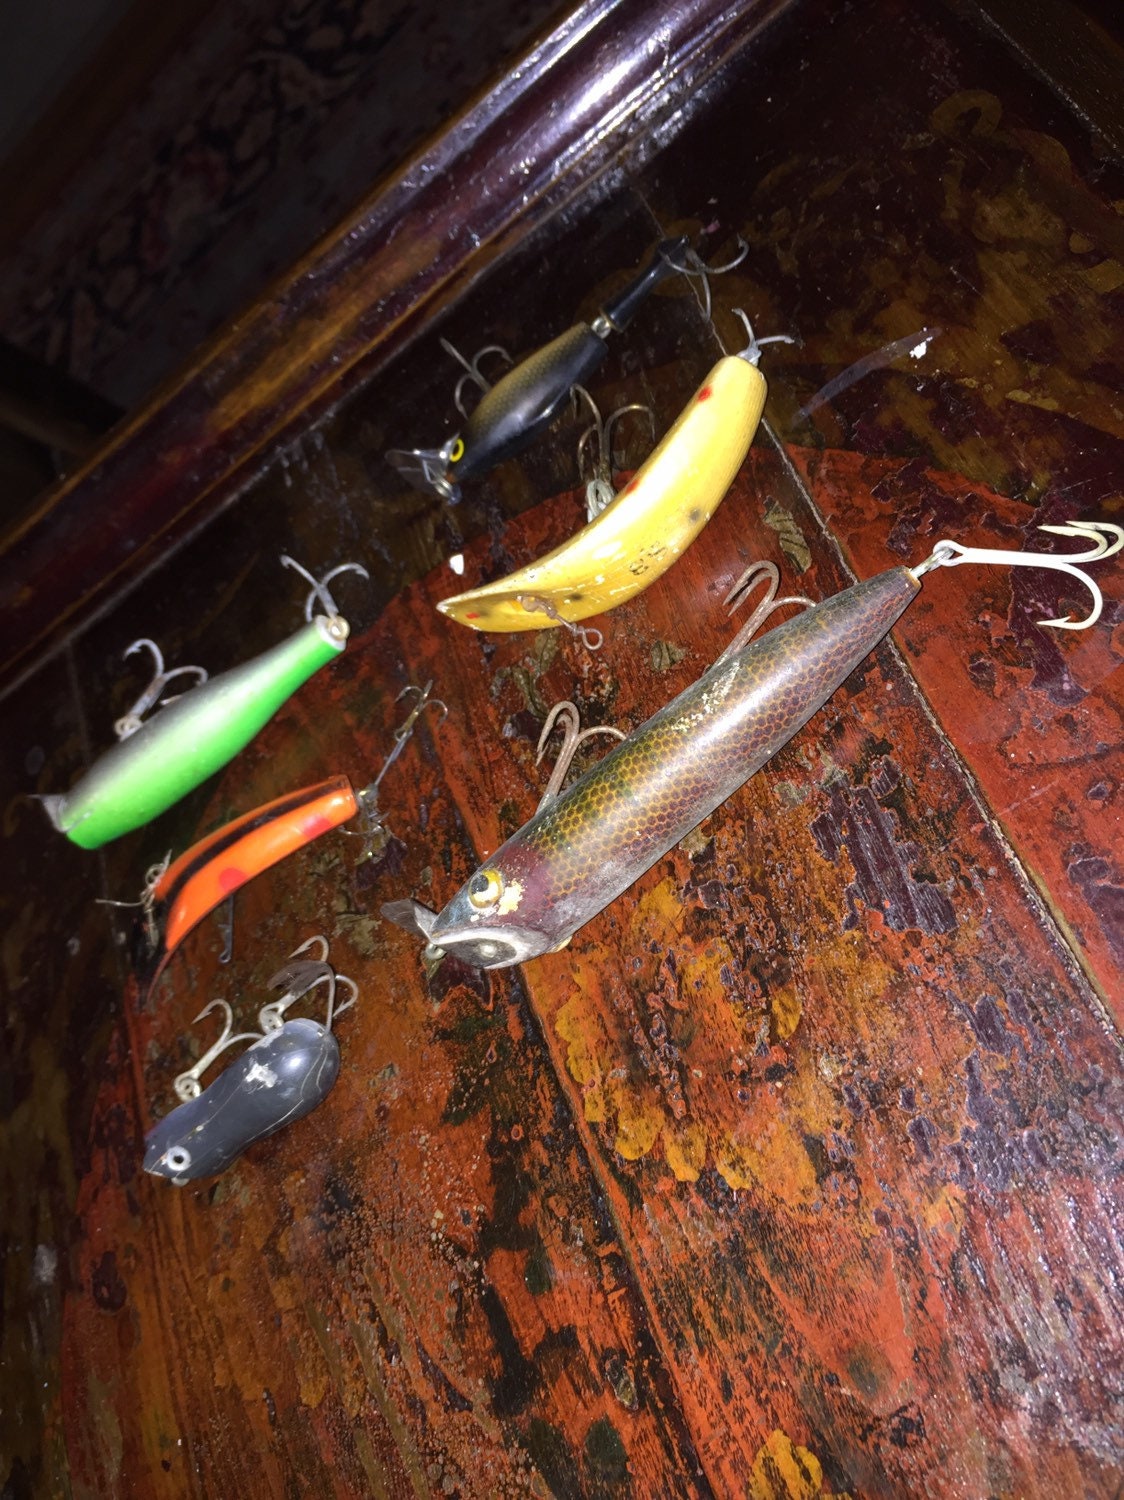 Set of 6 Antique/vintage Fishing Lures, Tackle, Gear, Freshwater,  Saltwater, Fishing, Folk Art, Handmade, Bait, Listing is for Set of Six -   Singapore